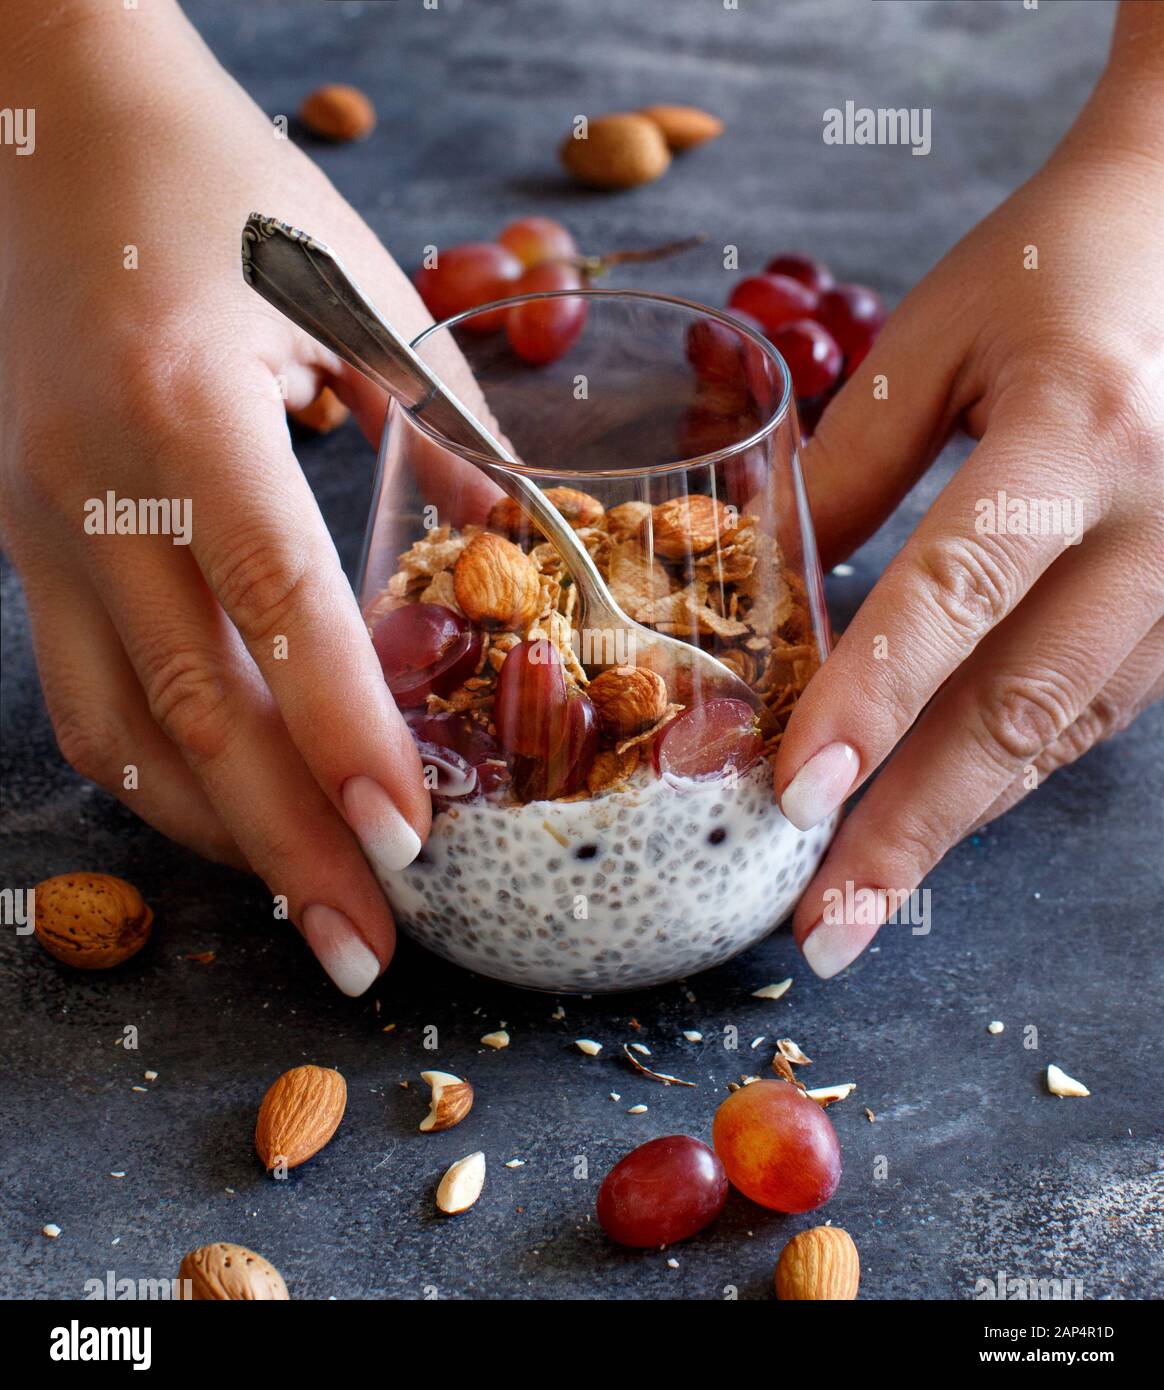 Chia pudding parfait with red grapes and almonds close up Stock Photo